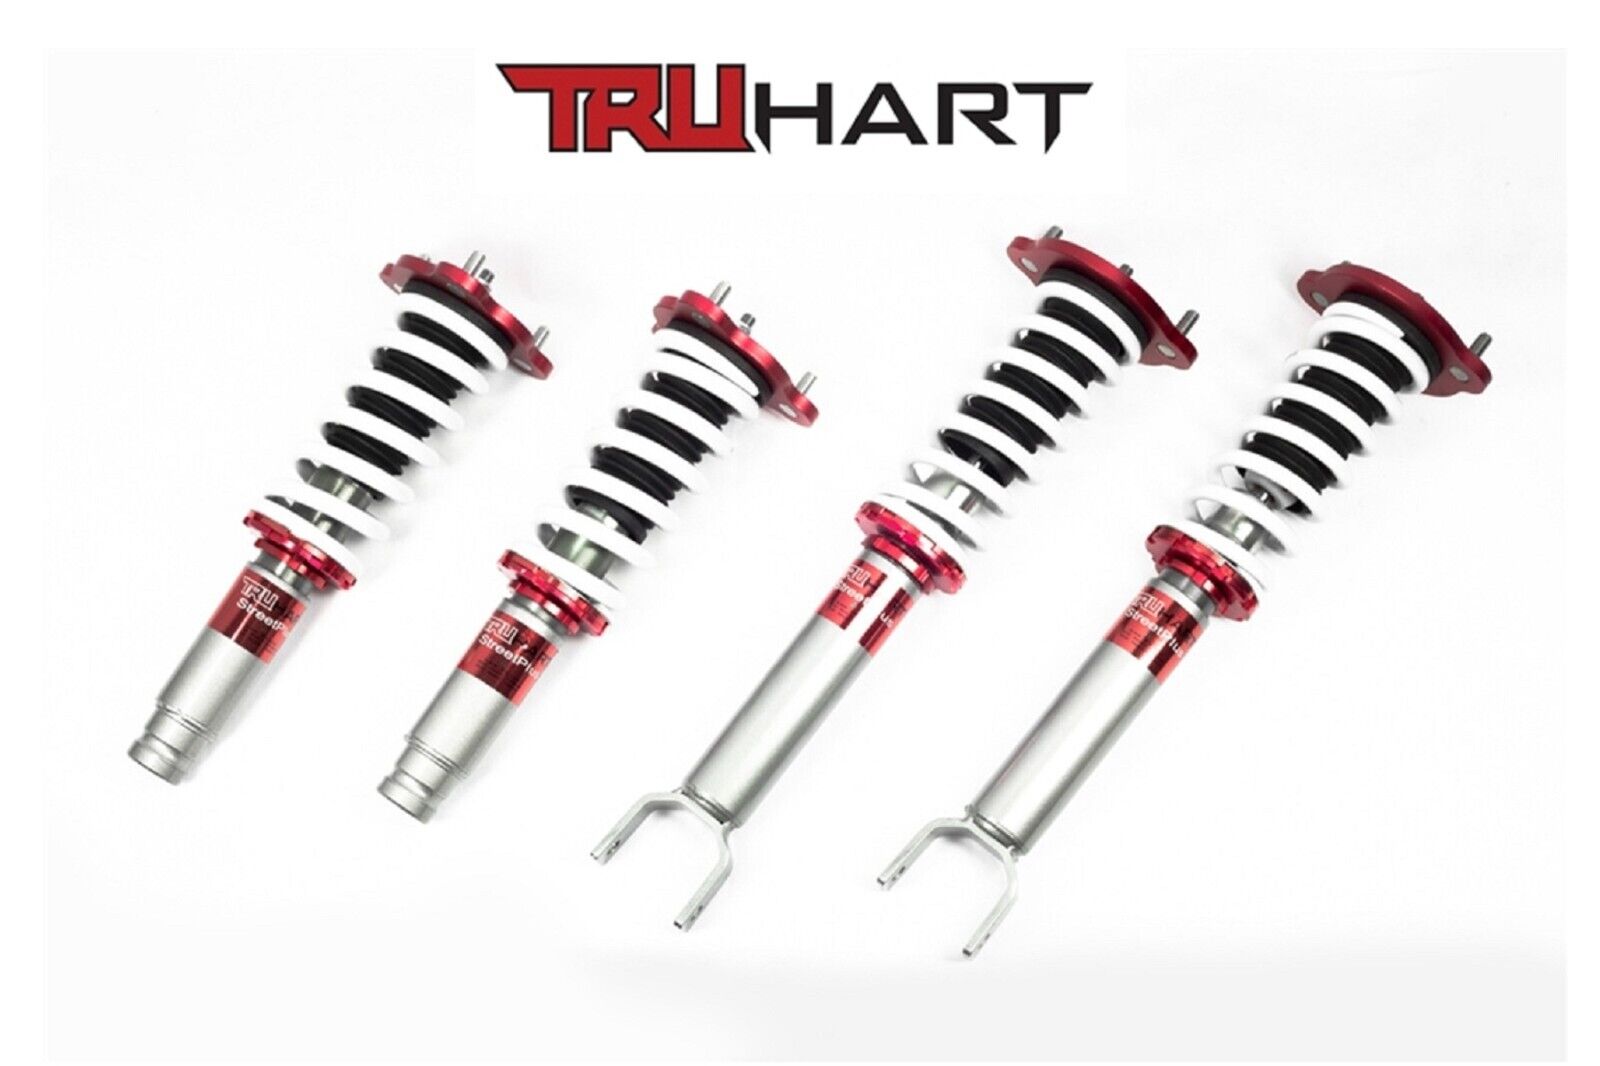 TruHart StreetPlus Coilover Damper Suspension New Set For 92-01 Prelude TH-H815